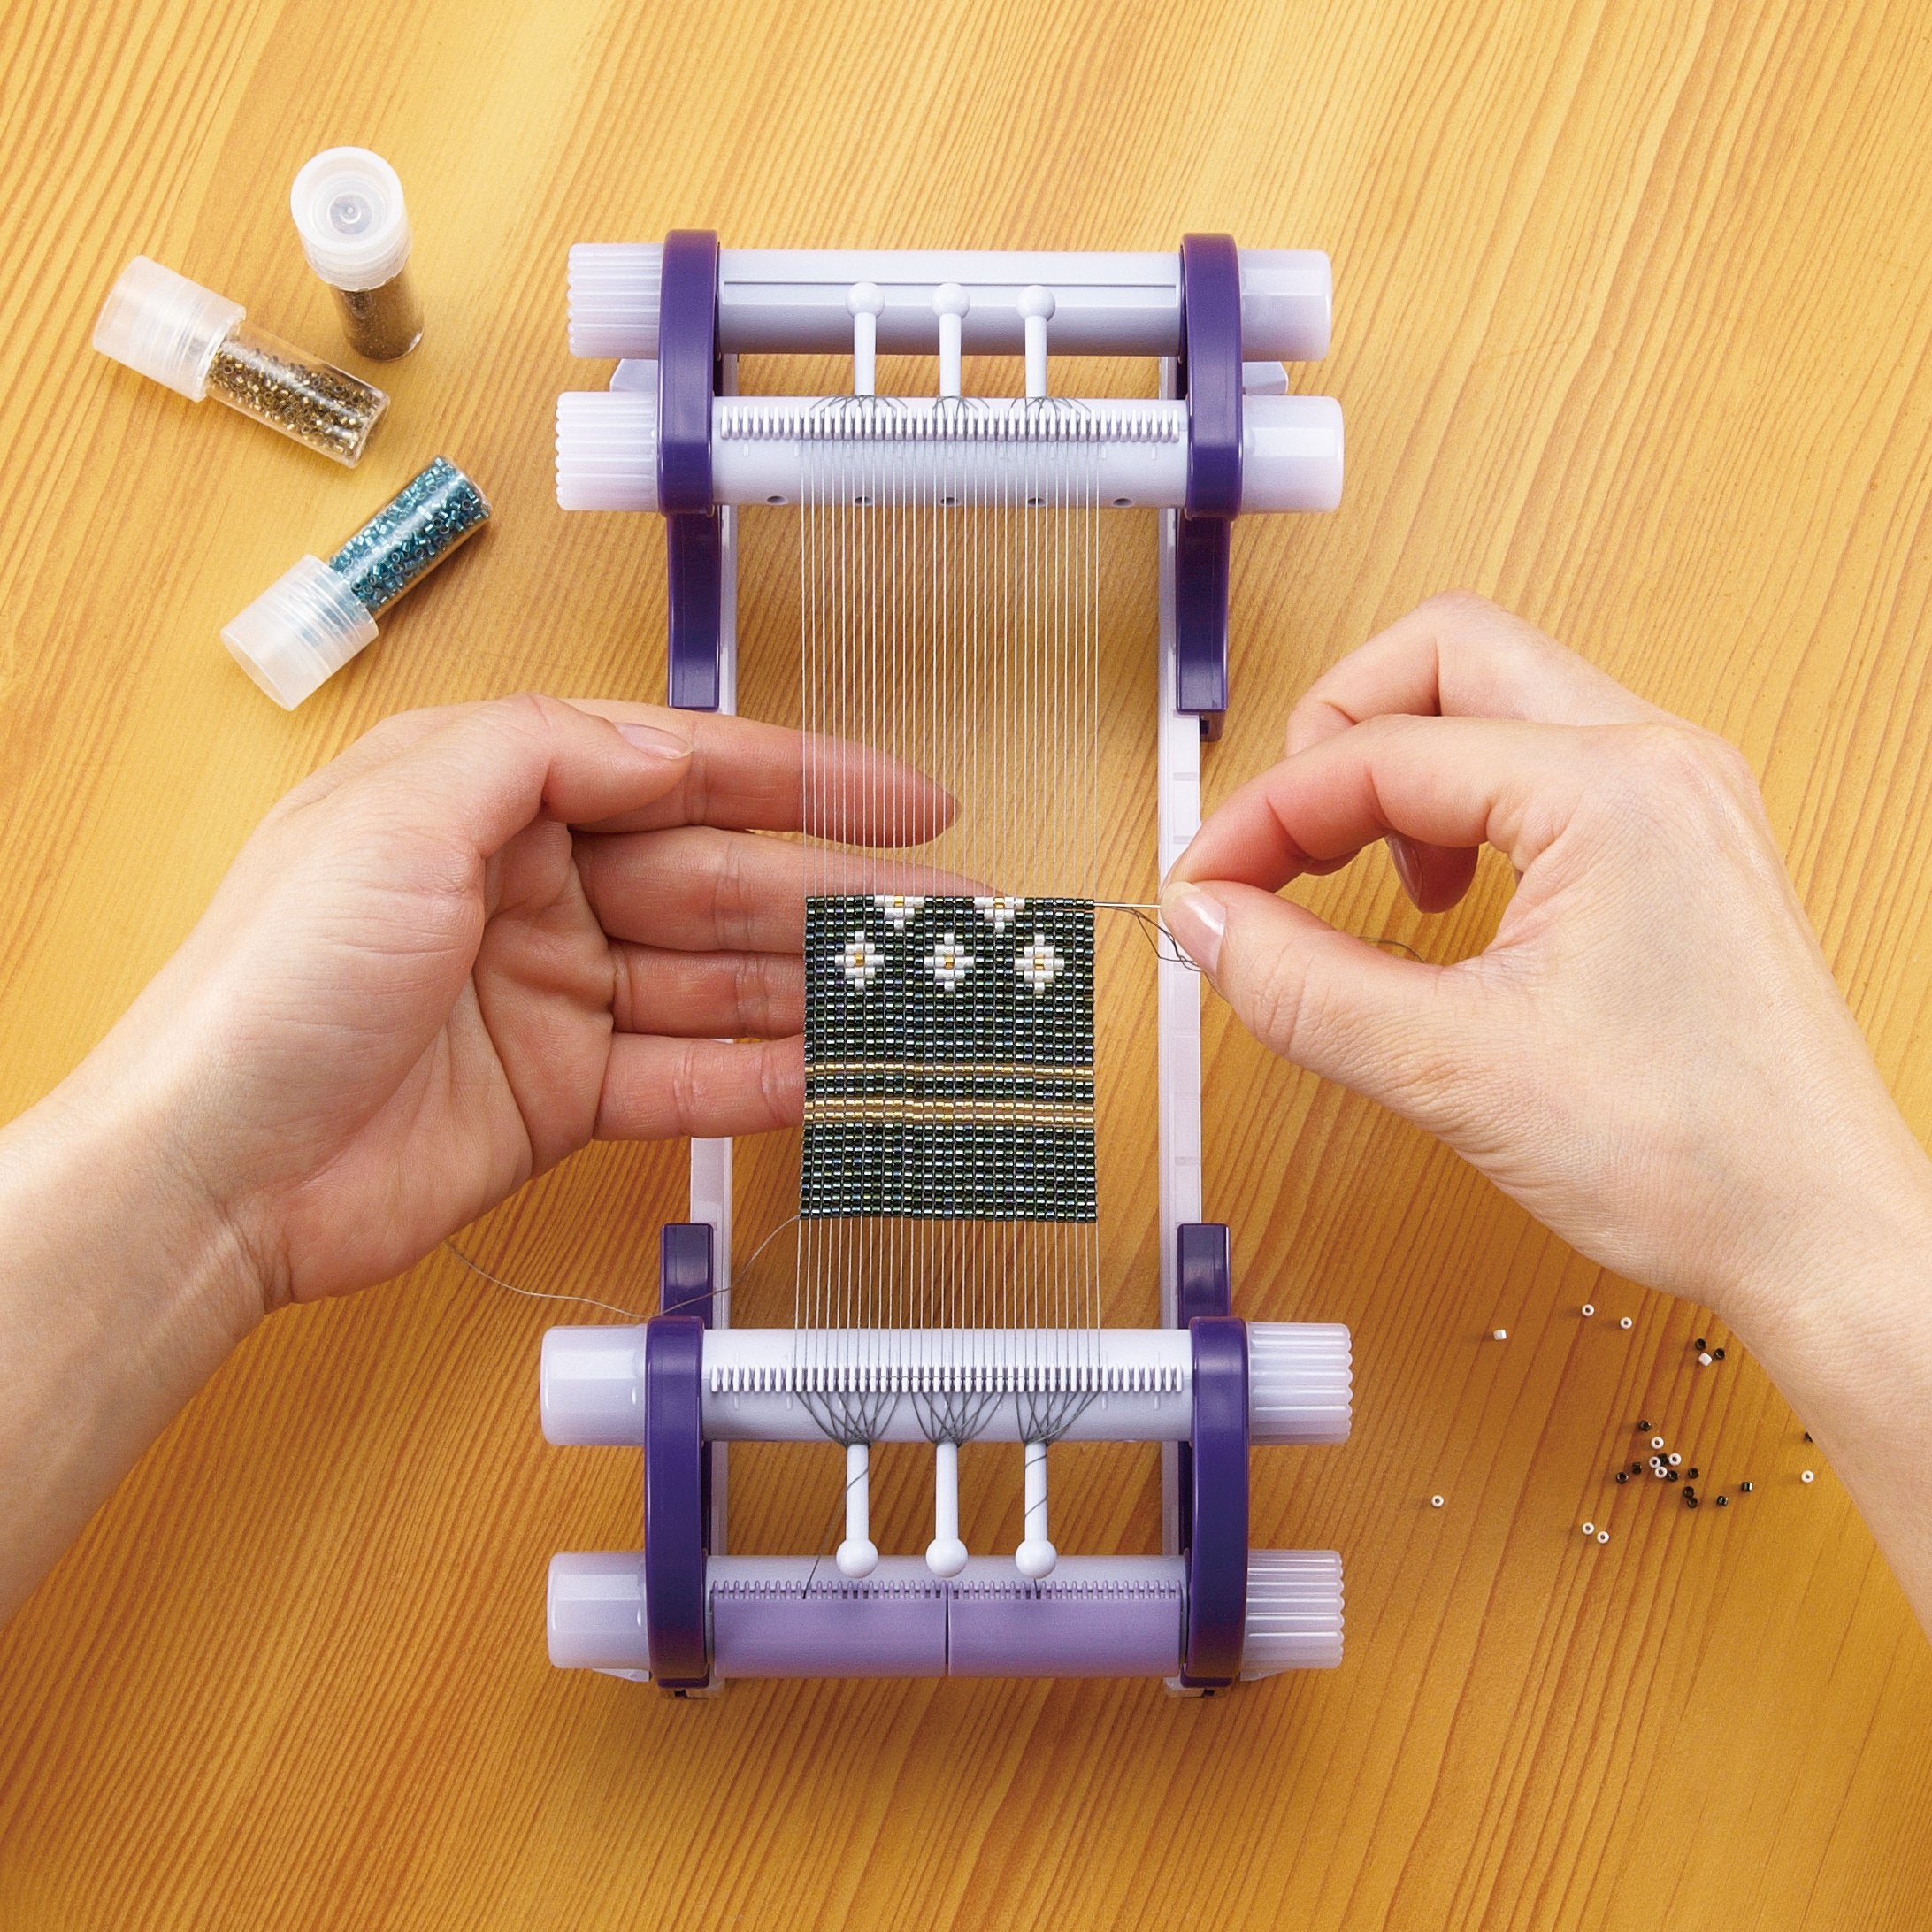 An Upright Bead Loom Making It Easier for Those Who Find A Flat